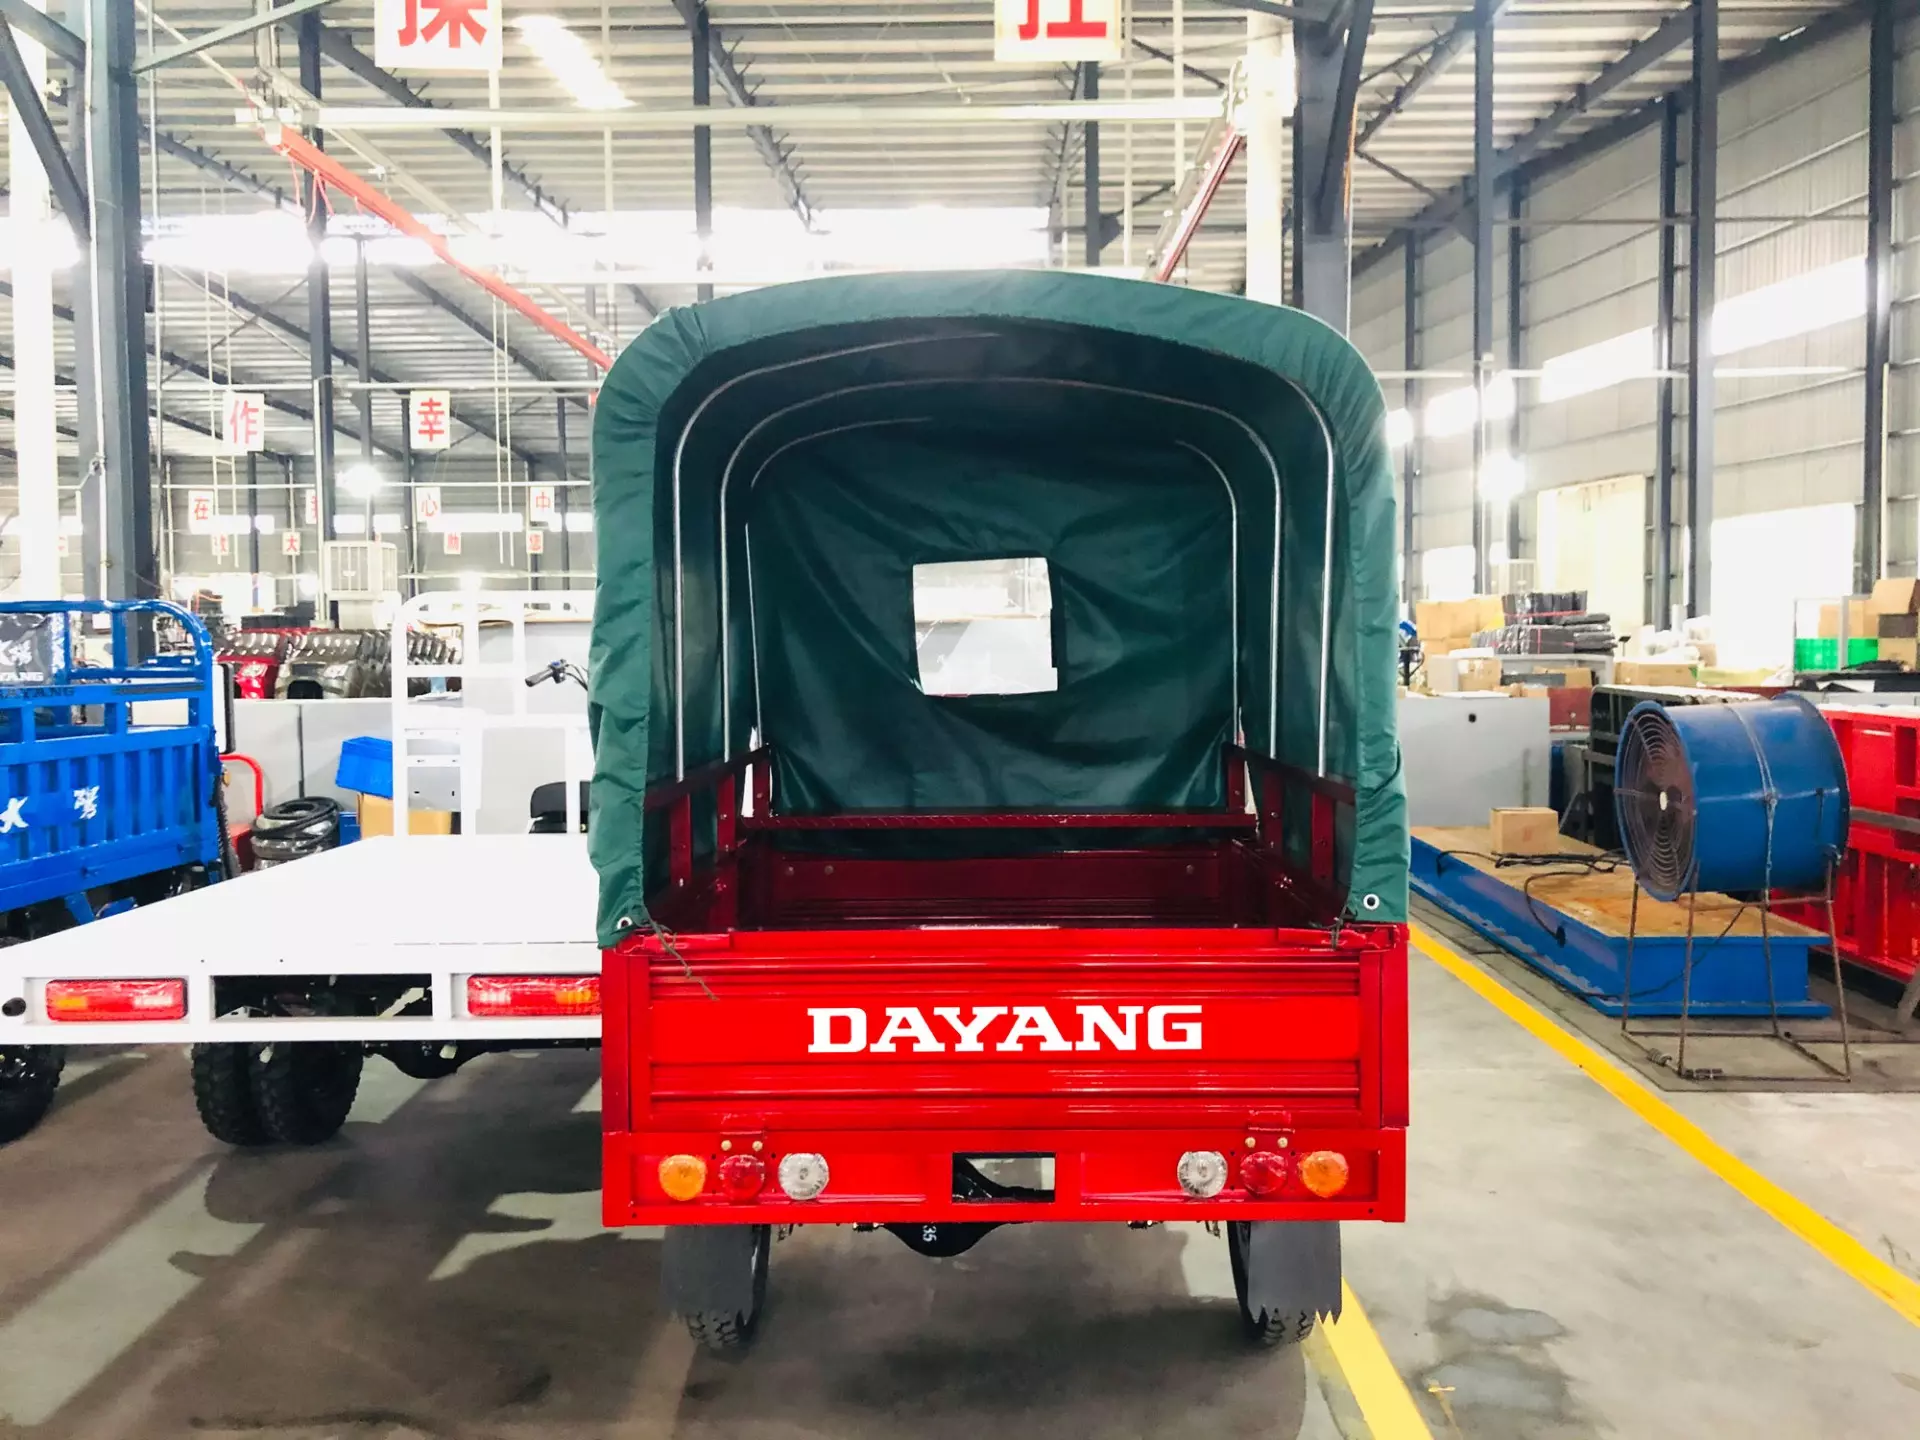 DAYANG 2021 High Quality DY-P1 Hot selling cargo Tarpaulin  tricycle models with 150cc engine OEM factory direct sale wholesale